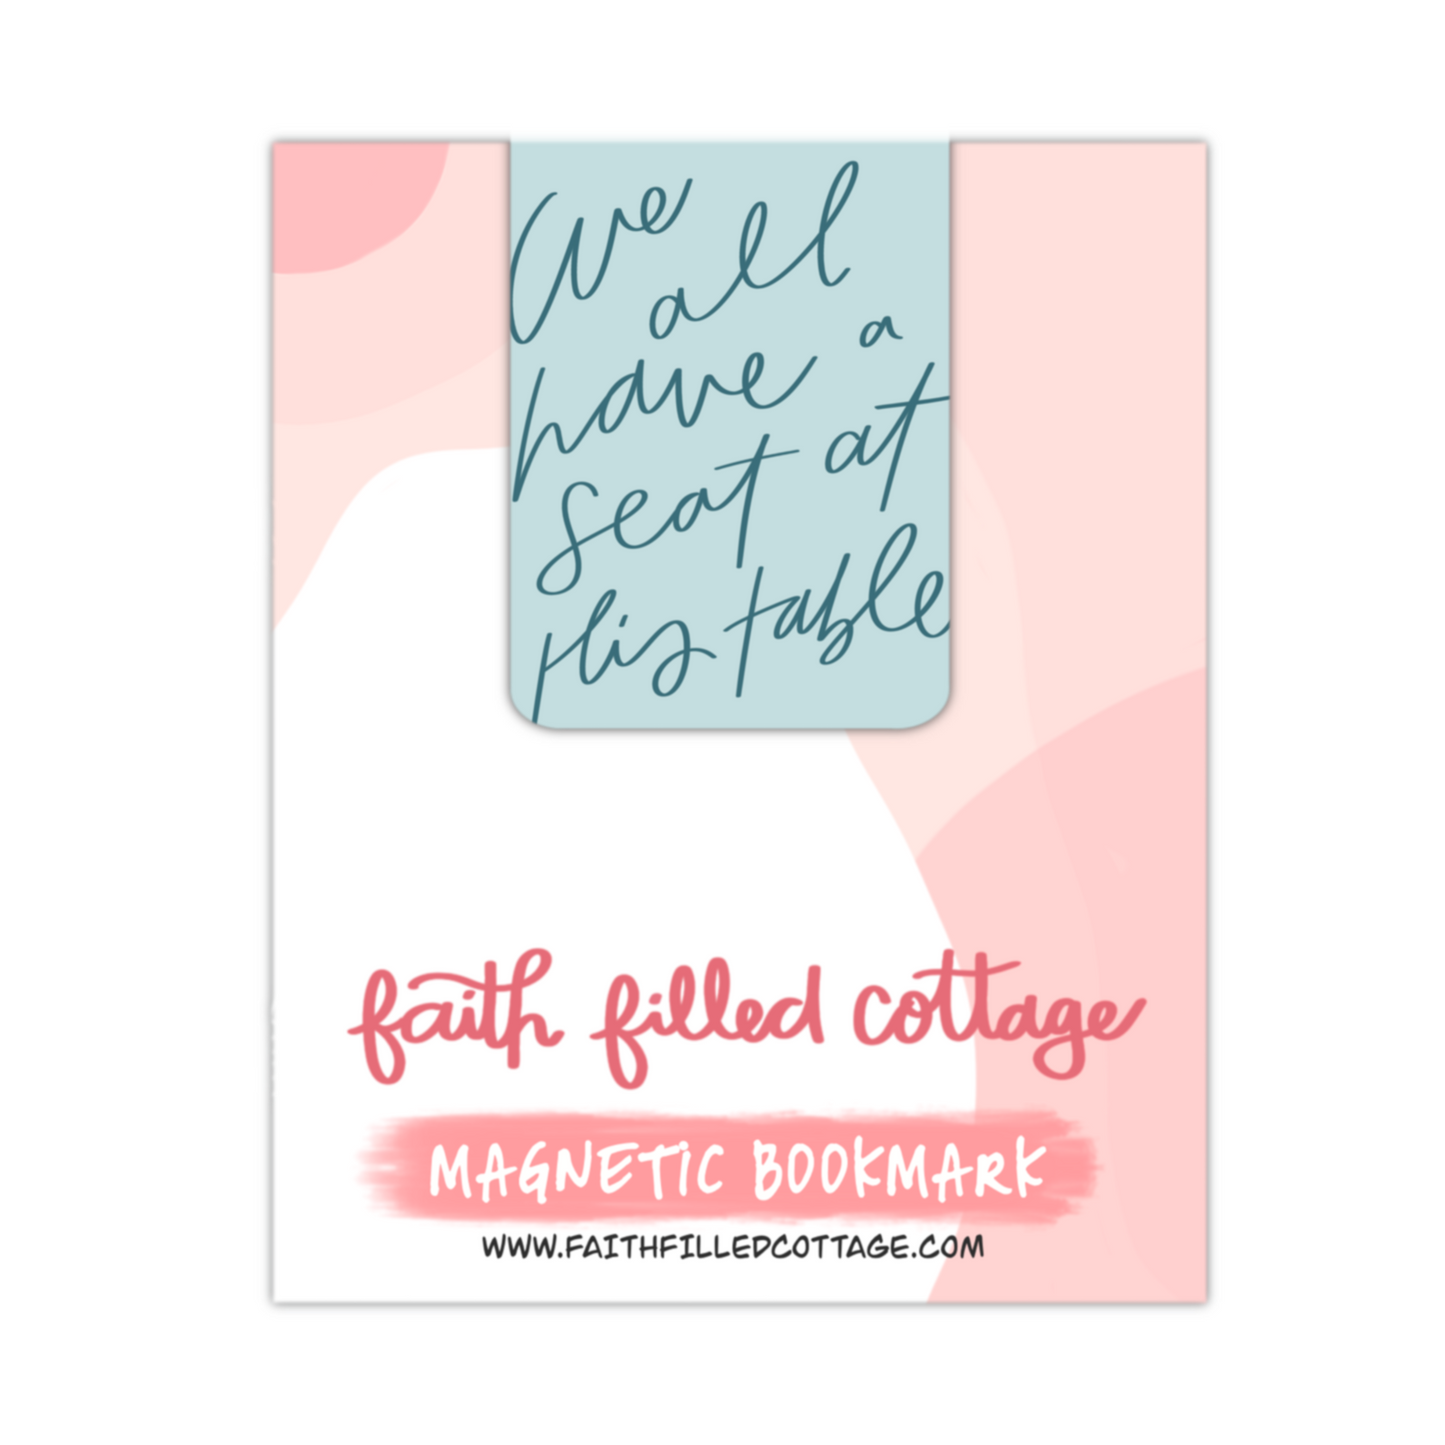 We All Have A Seat At His Table (magnetic bookmark)